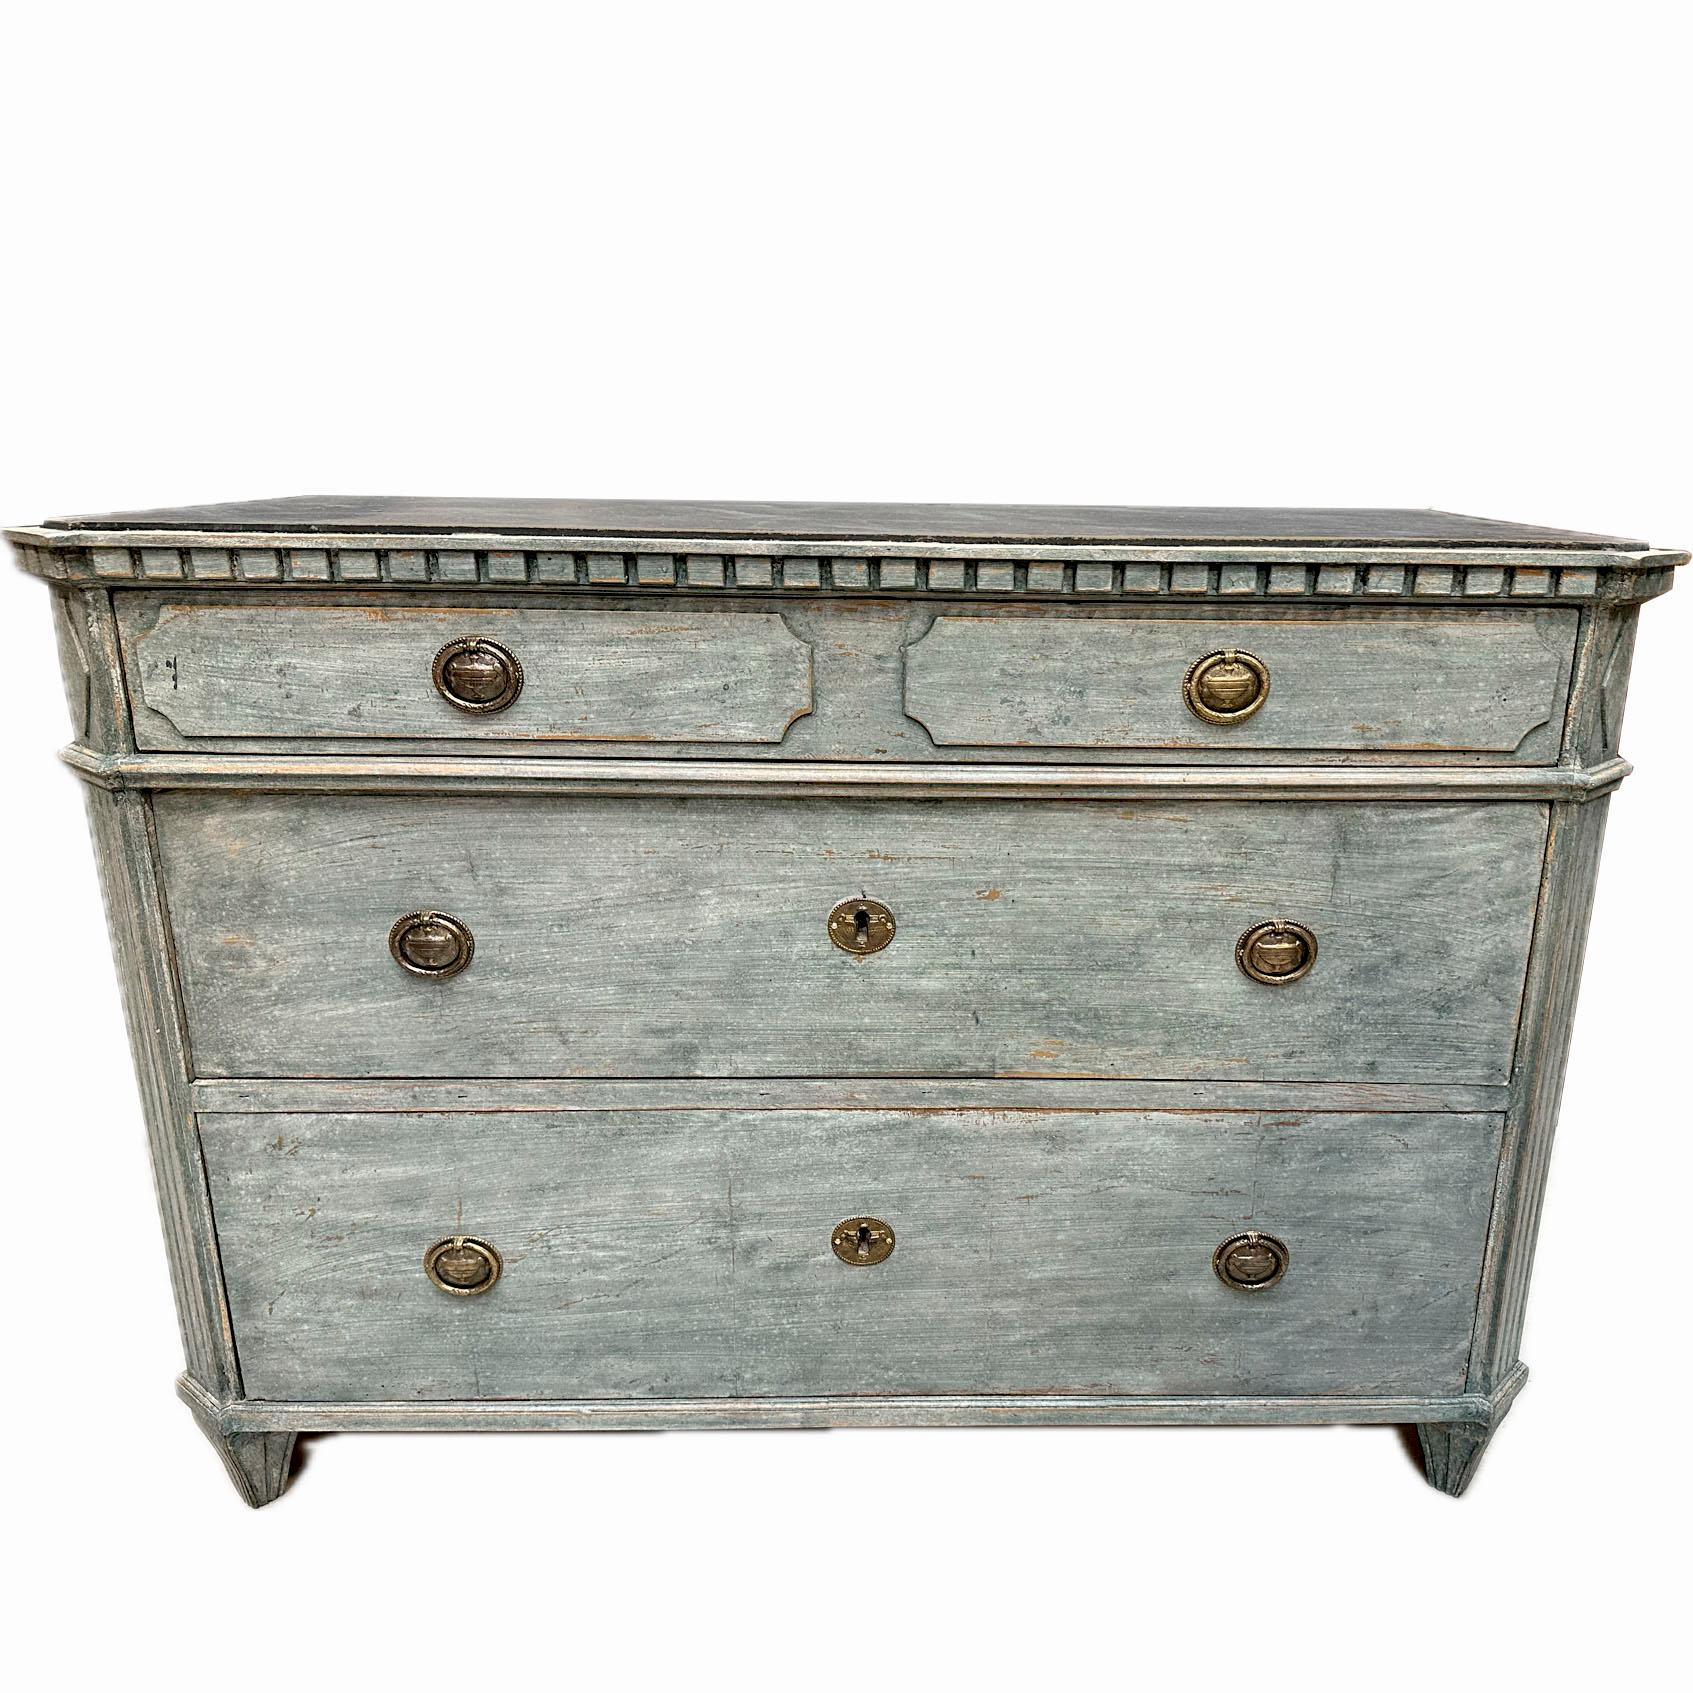 Swedish Gustavian style chest of three drawers, dating from the mid 19th century, painted in a blue color scheme. Later professional painted with a lovely patina.
Features a wooden black faux marbled tabletop with canted corners and dentil mouldings